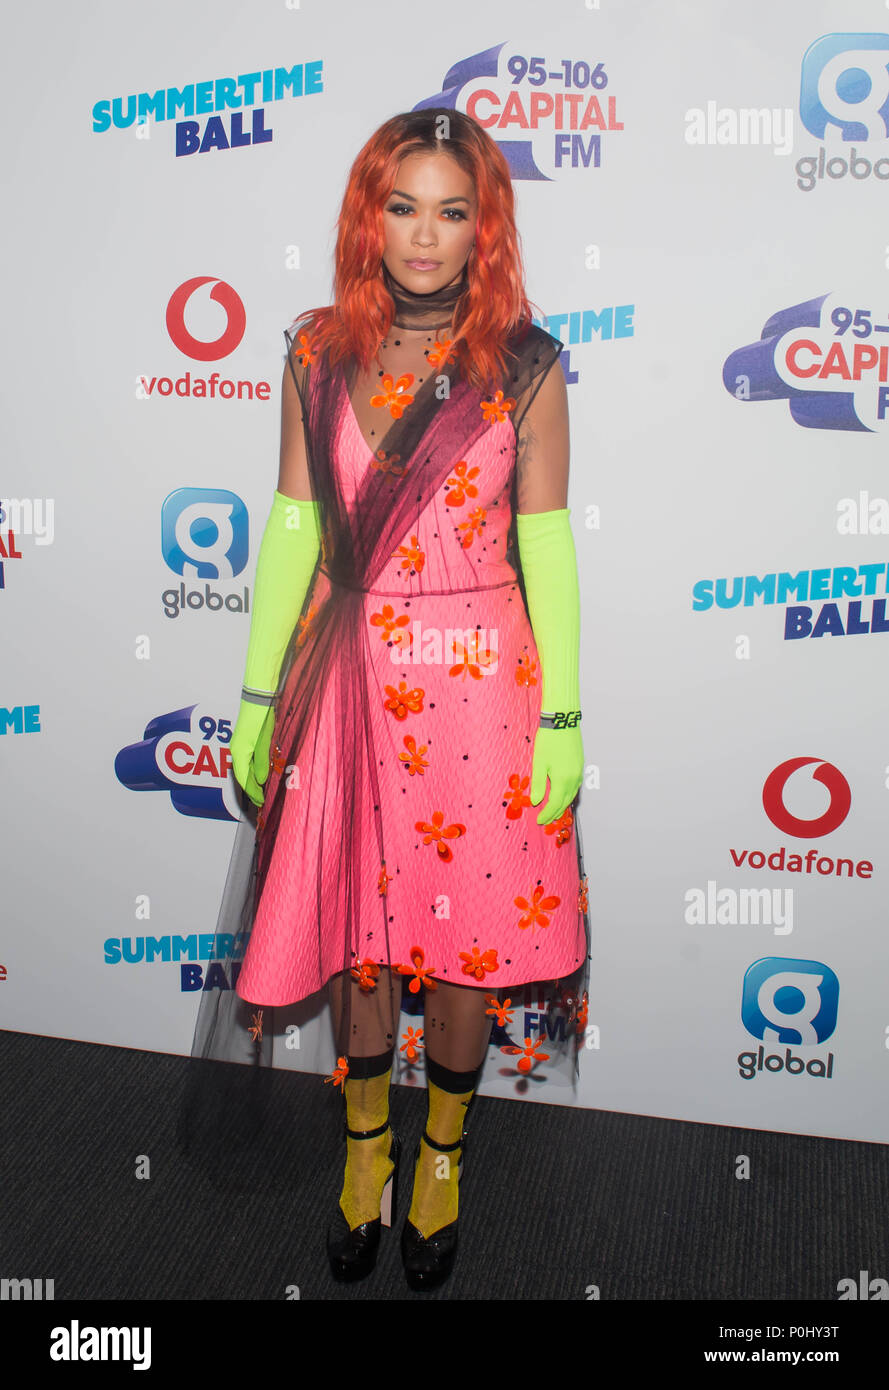 Wembley, United Kingdom. 9th June 2018. Rita Ora  at Capital’s Summertime Ball with Vodafone at London’s Wembley Stadium. The sell-out event saw performances from this summer’s hottest artists Camila Cabello, Shawn Mendes, Rita Ora, Charlie Puth, Jess Glynne, Craig David, Anne-Marie, Rudimental, Sean Paul, Clean Bandit, James Arthur, Sigala, Years & Years, Jax Jones, Raye, Jonas Blue, Mabel, Stefflon Don, Yungen and G-Eazy. Michael Tubi/ Alamy Live News Stock Photo